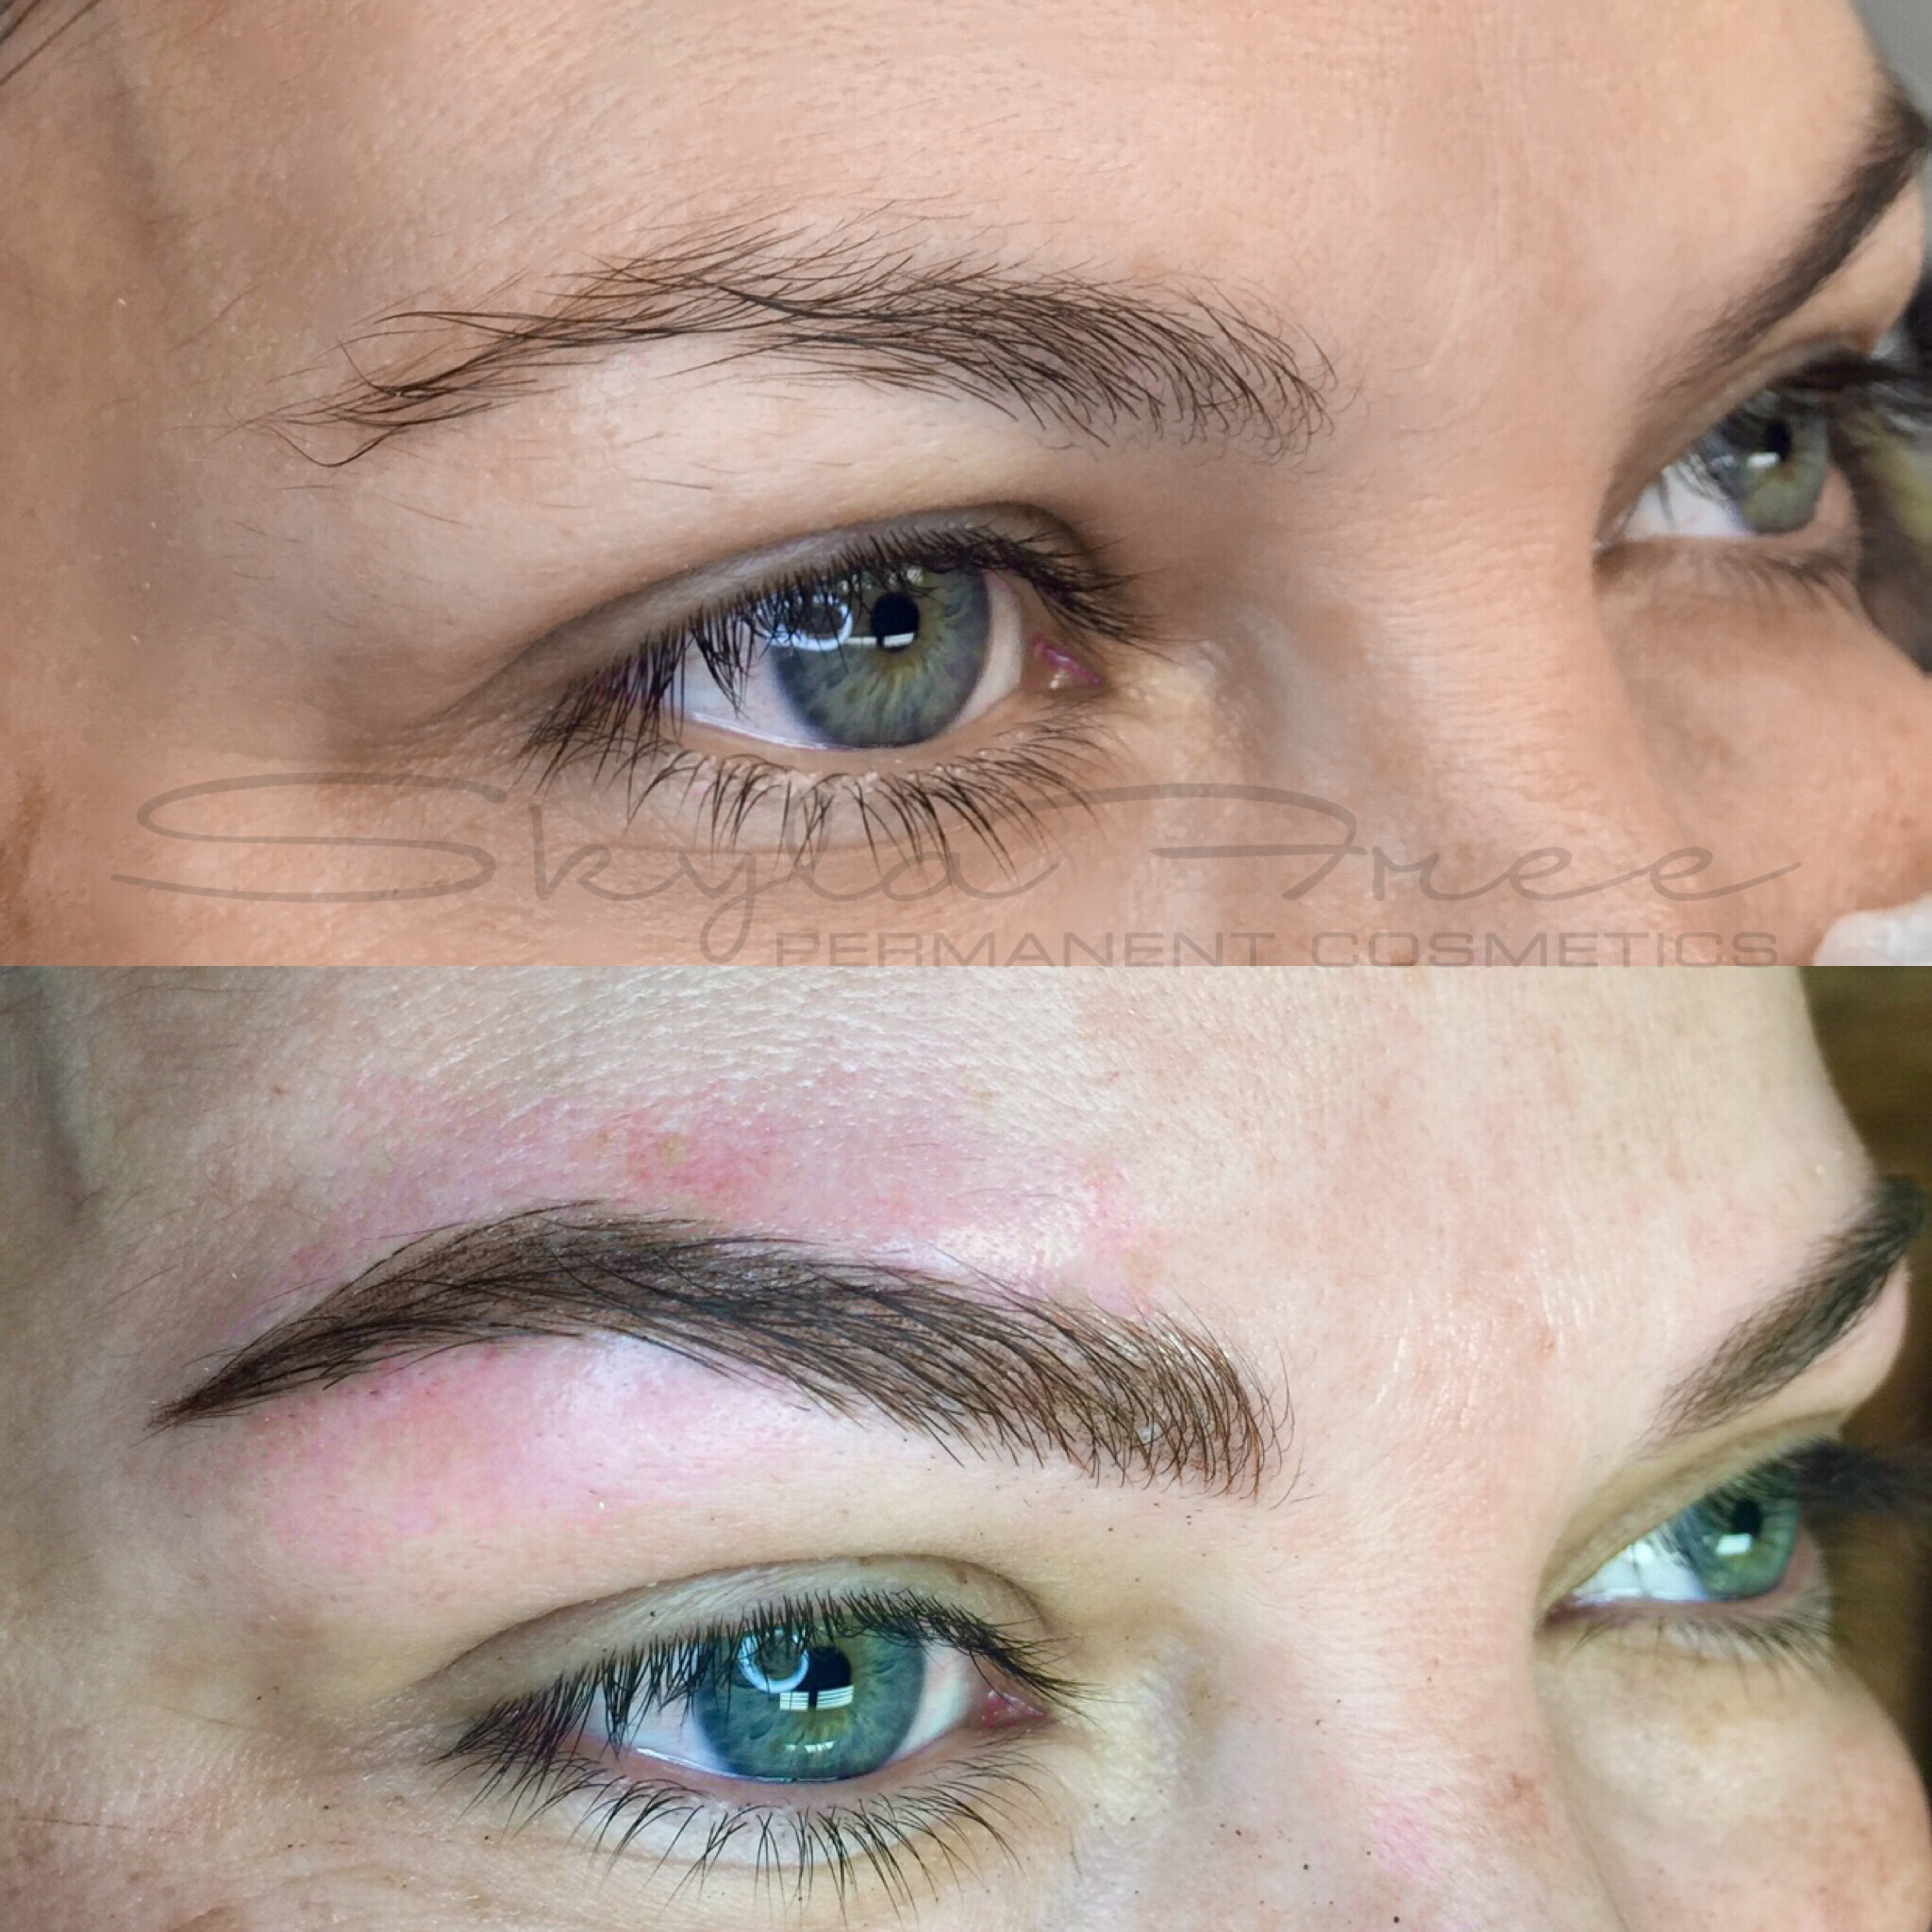 The microblading process